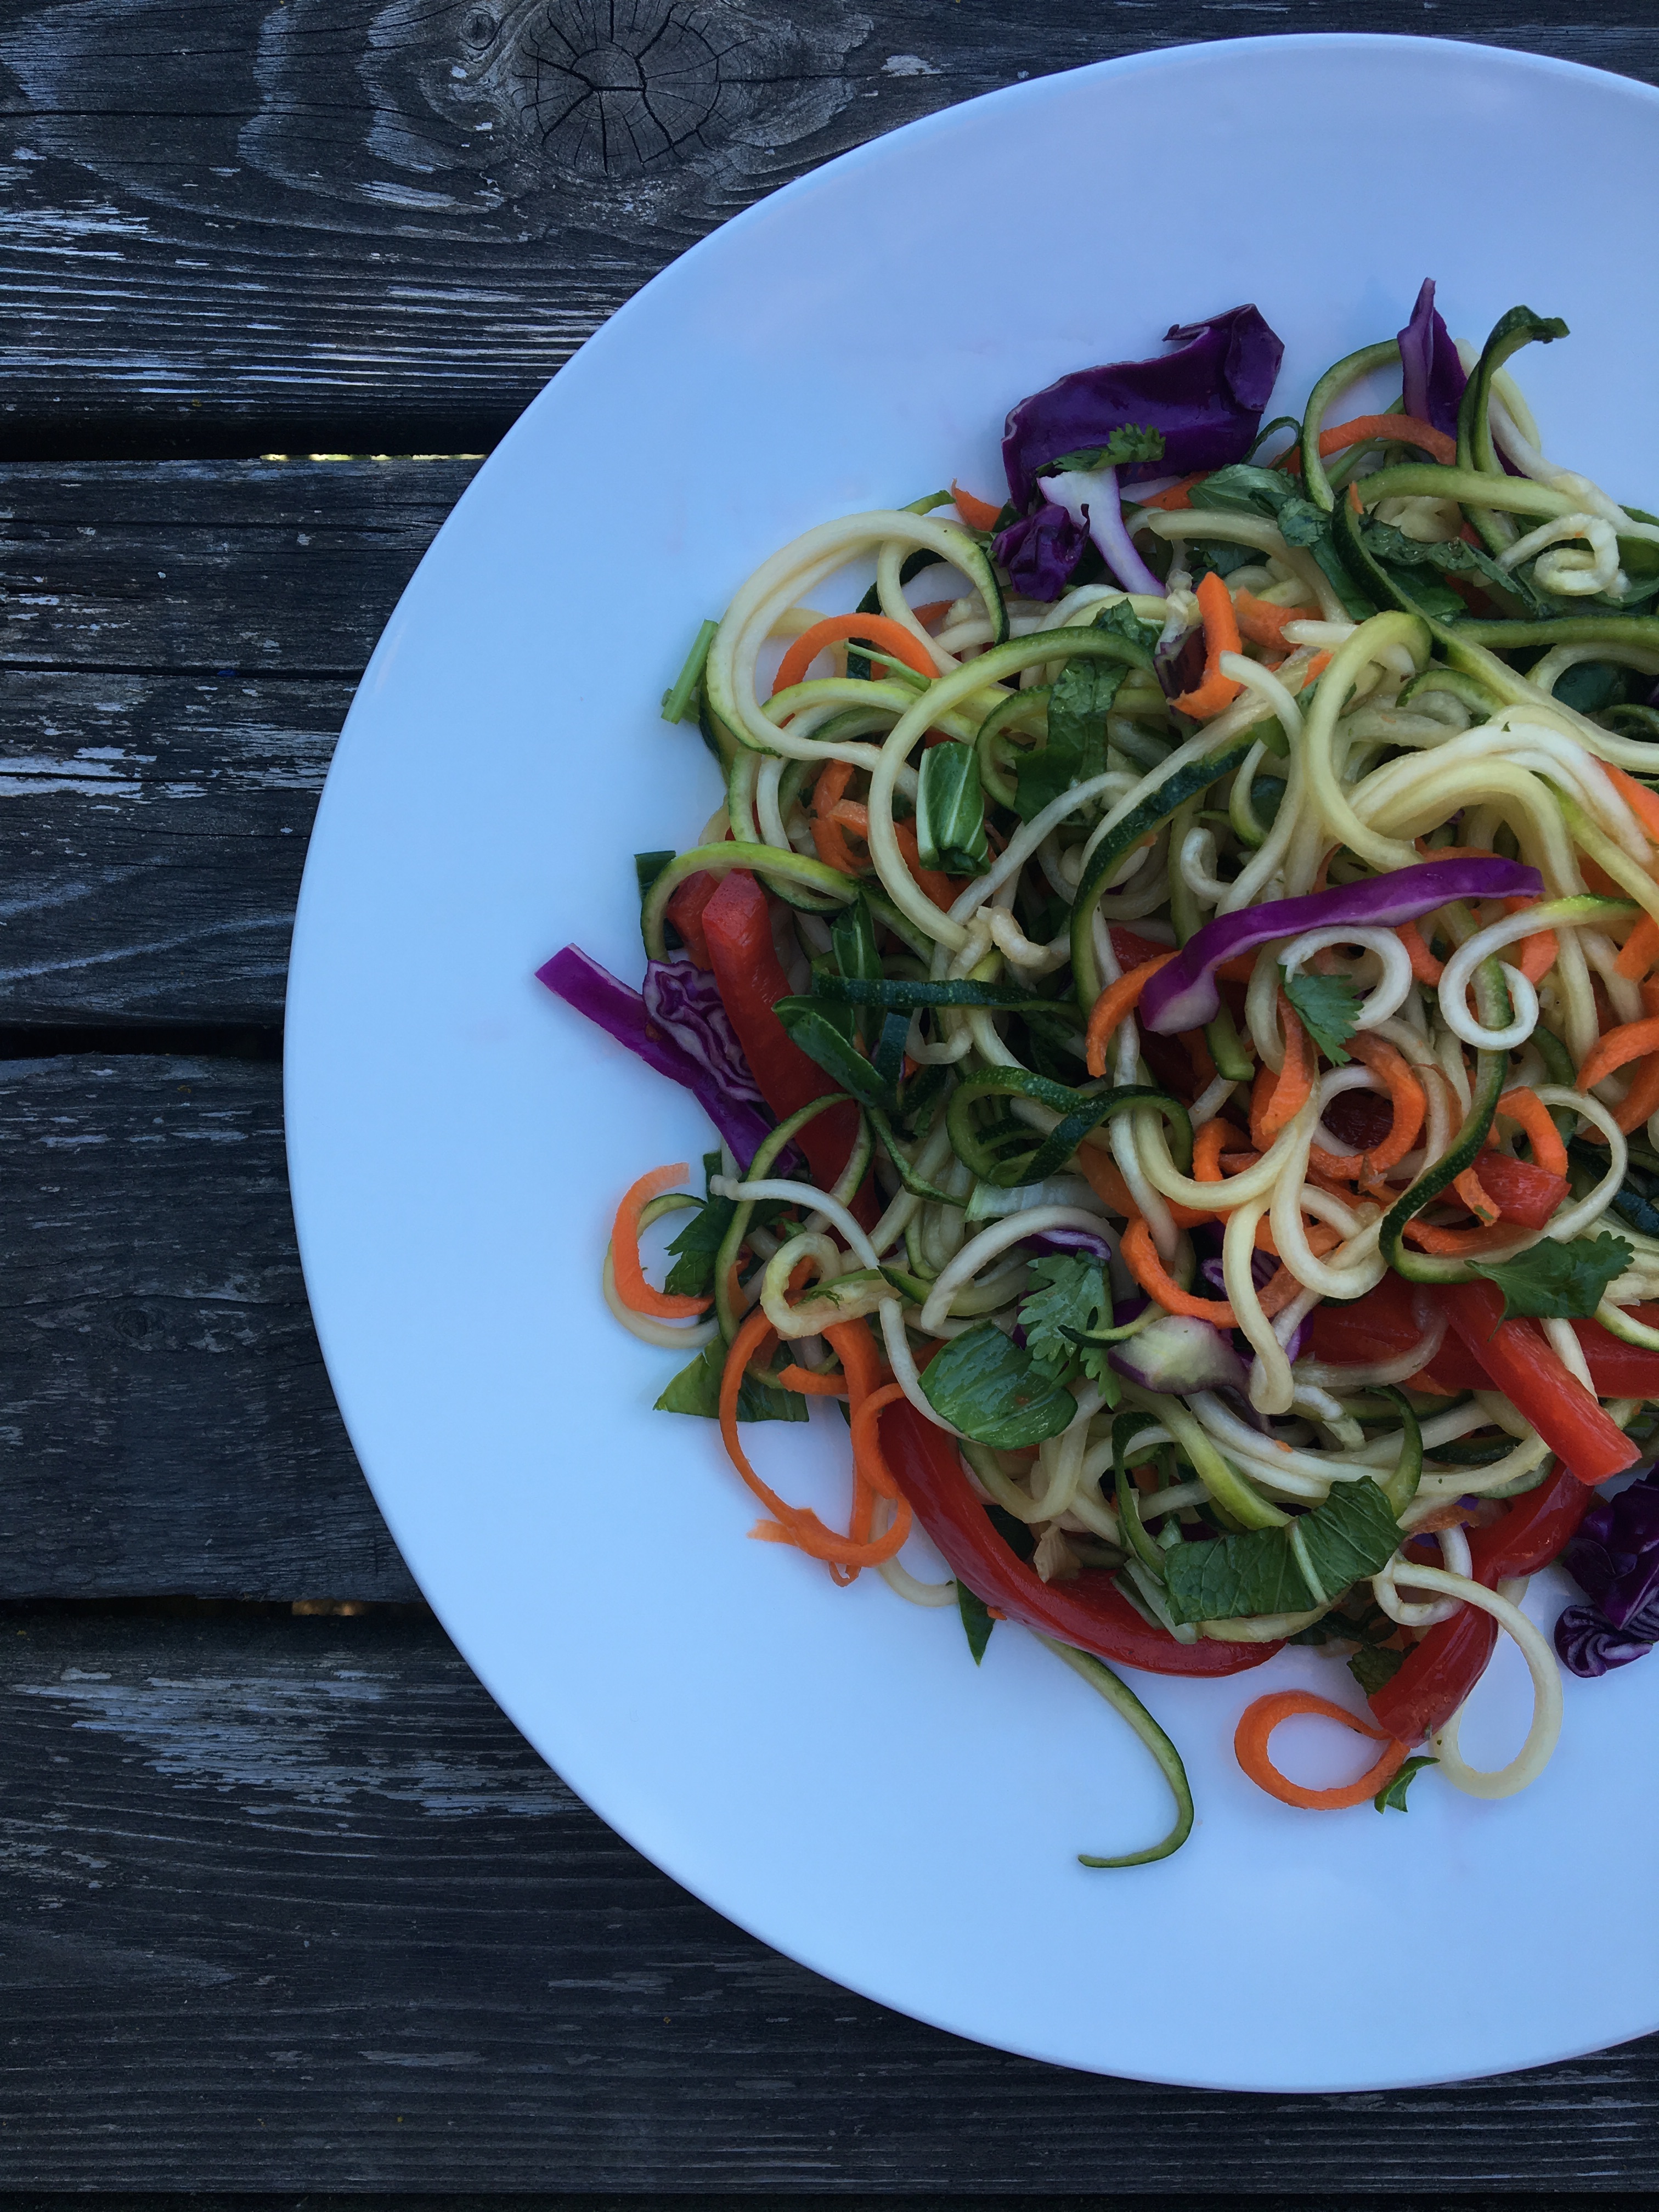 Thai Zucchini Noodle Salad with spiralized zucchini and carrots, bok choy, purple cabbage, red bell pepper, green onions, and a lime vinaigrette